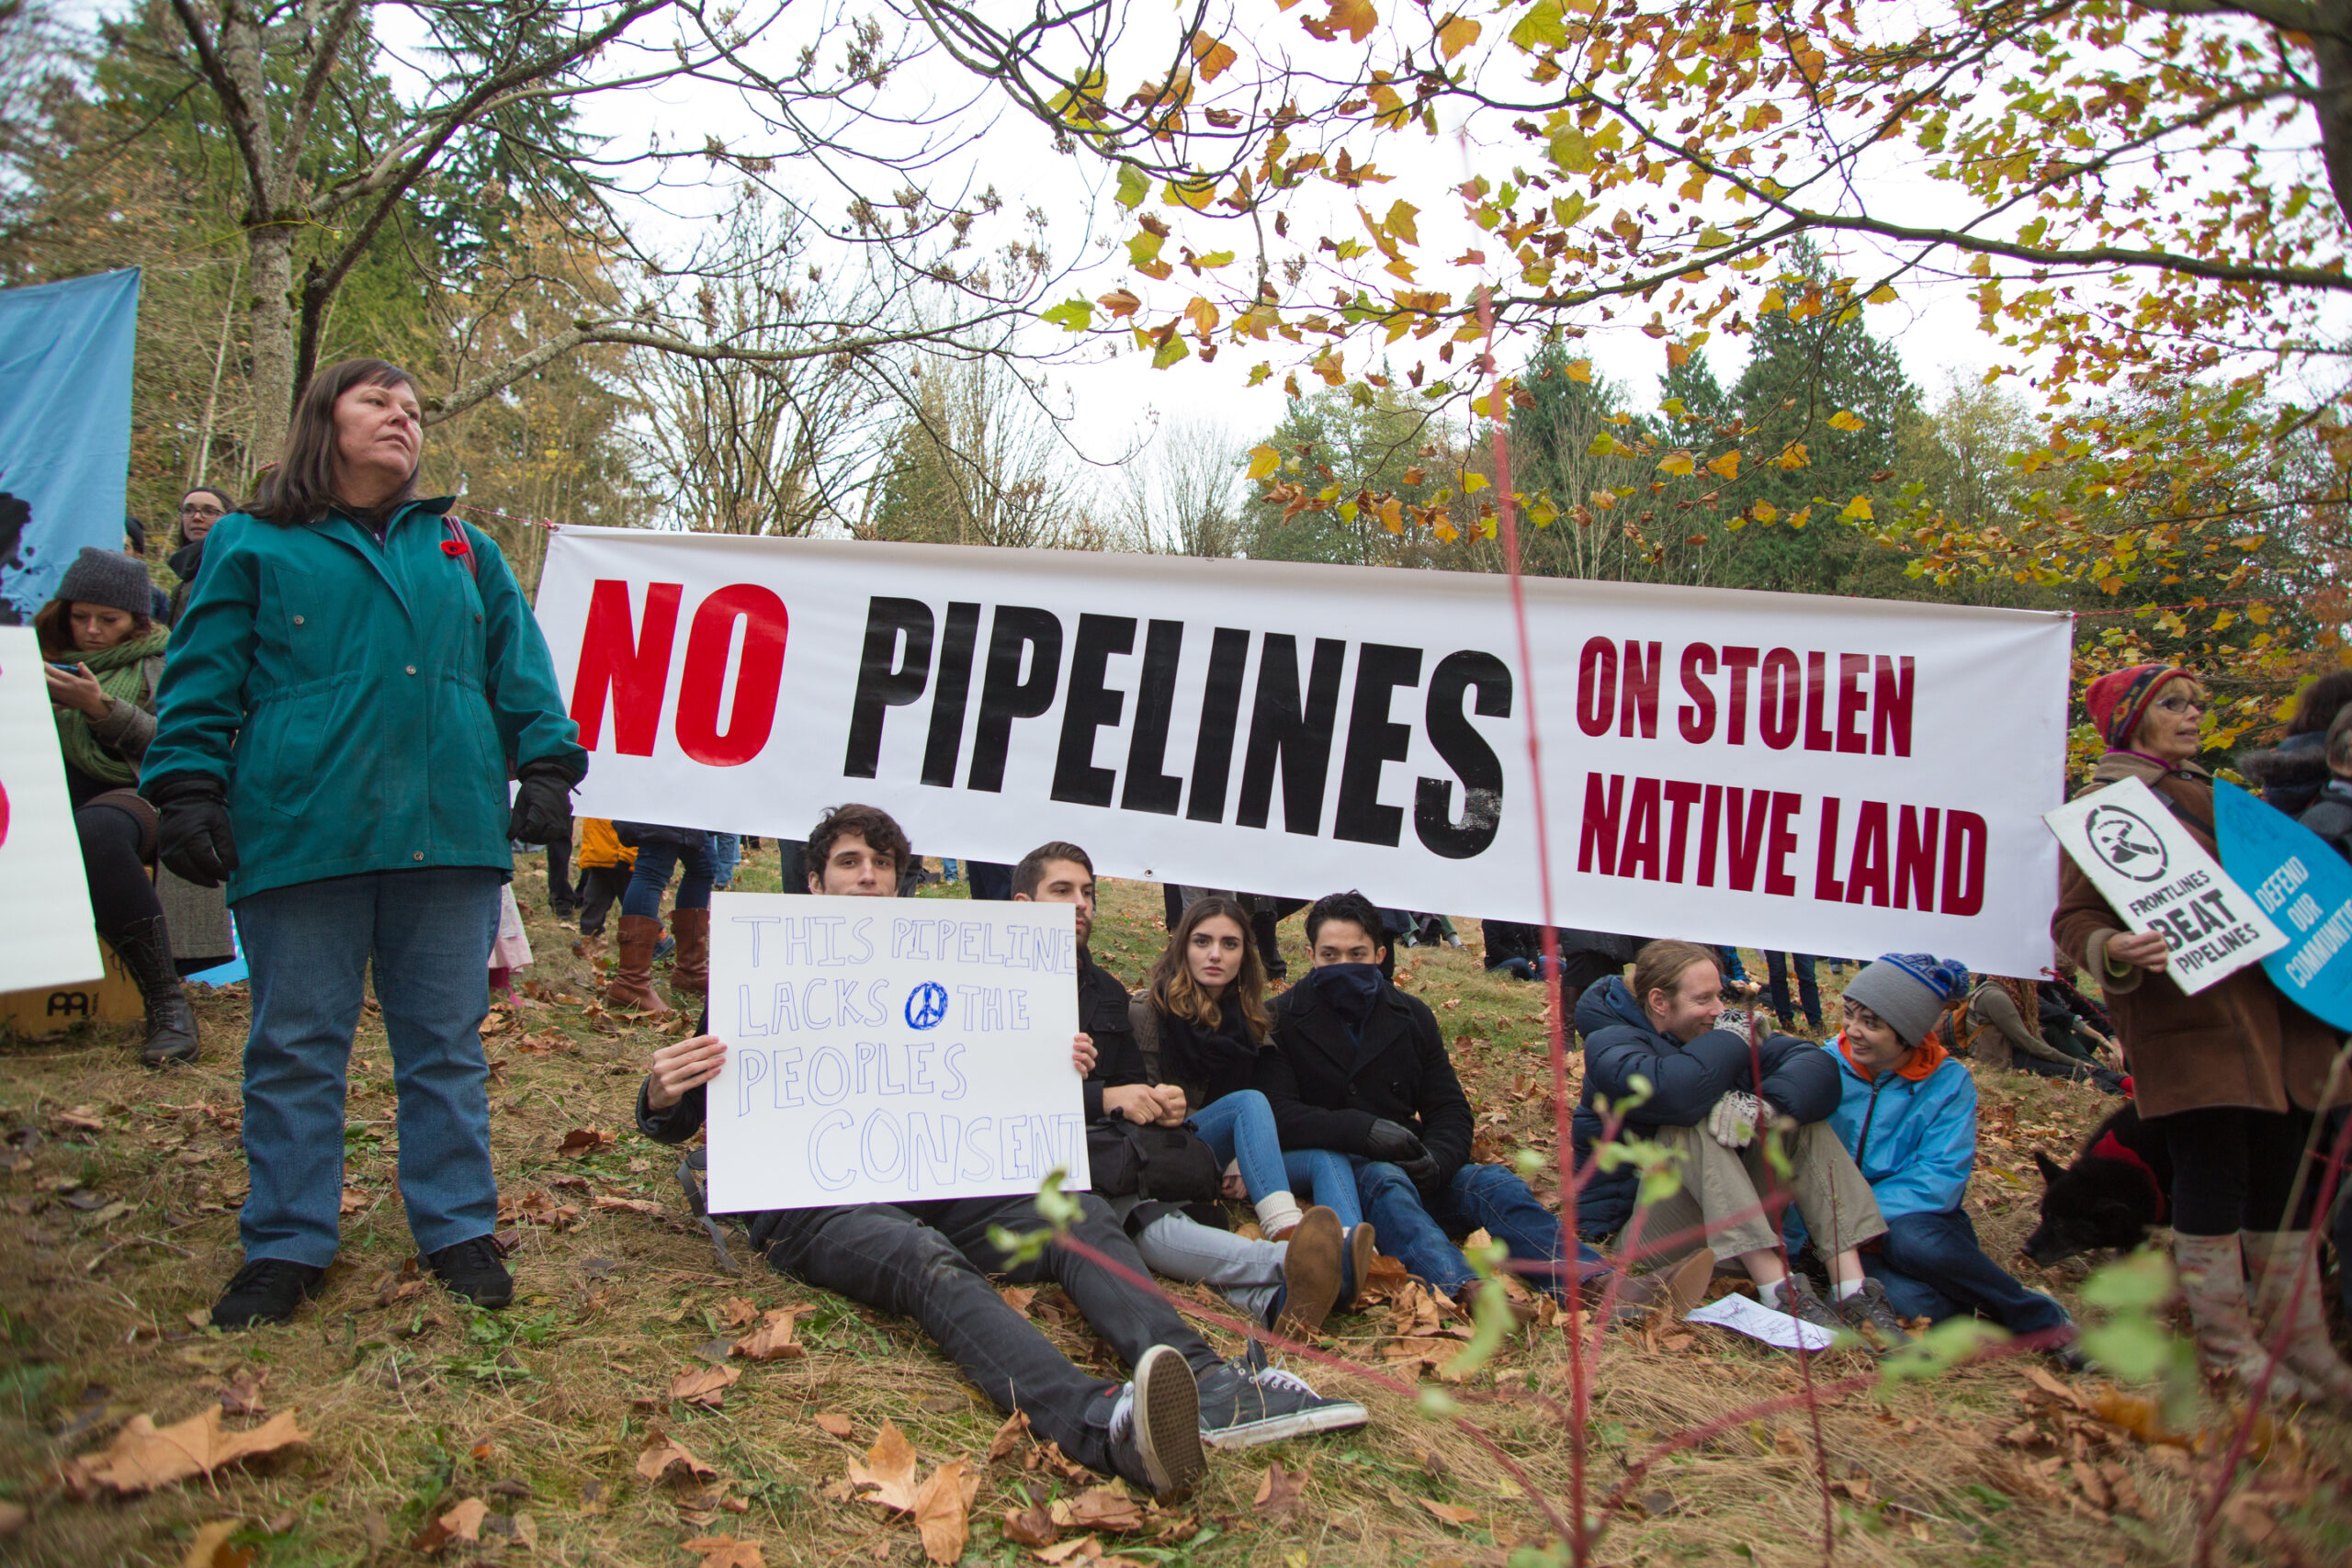 No pipelines on stolen native land